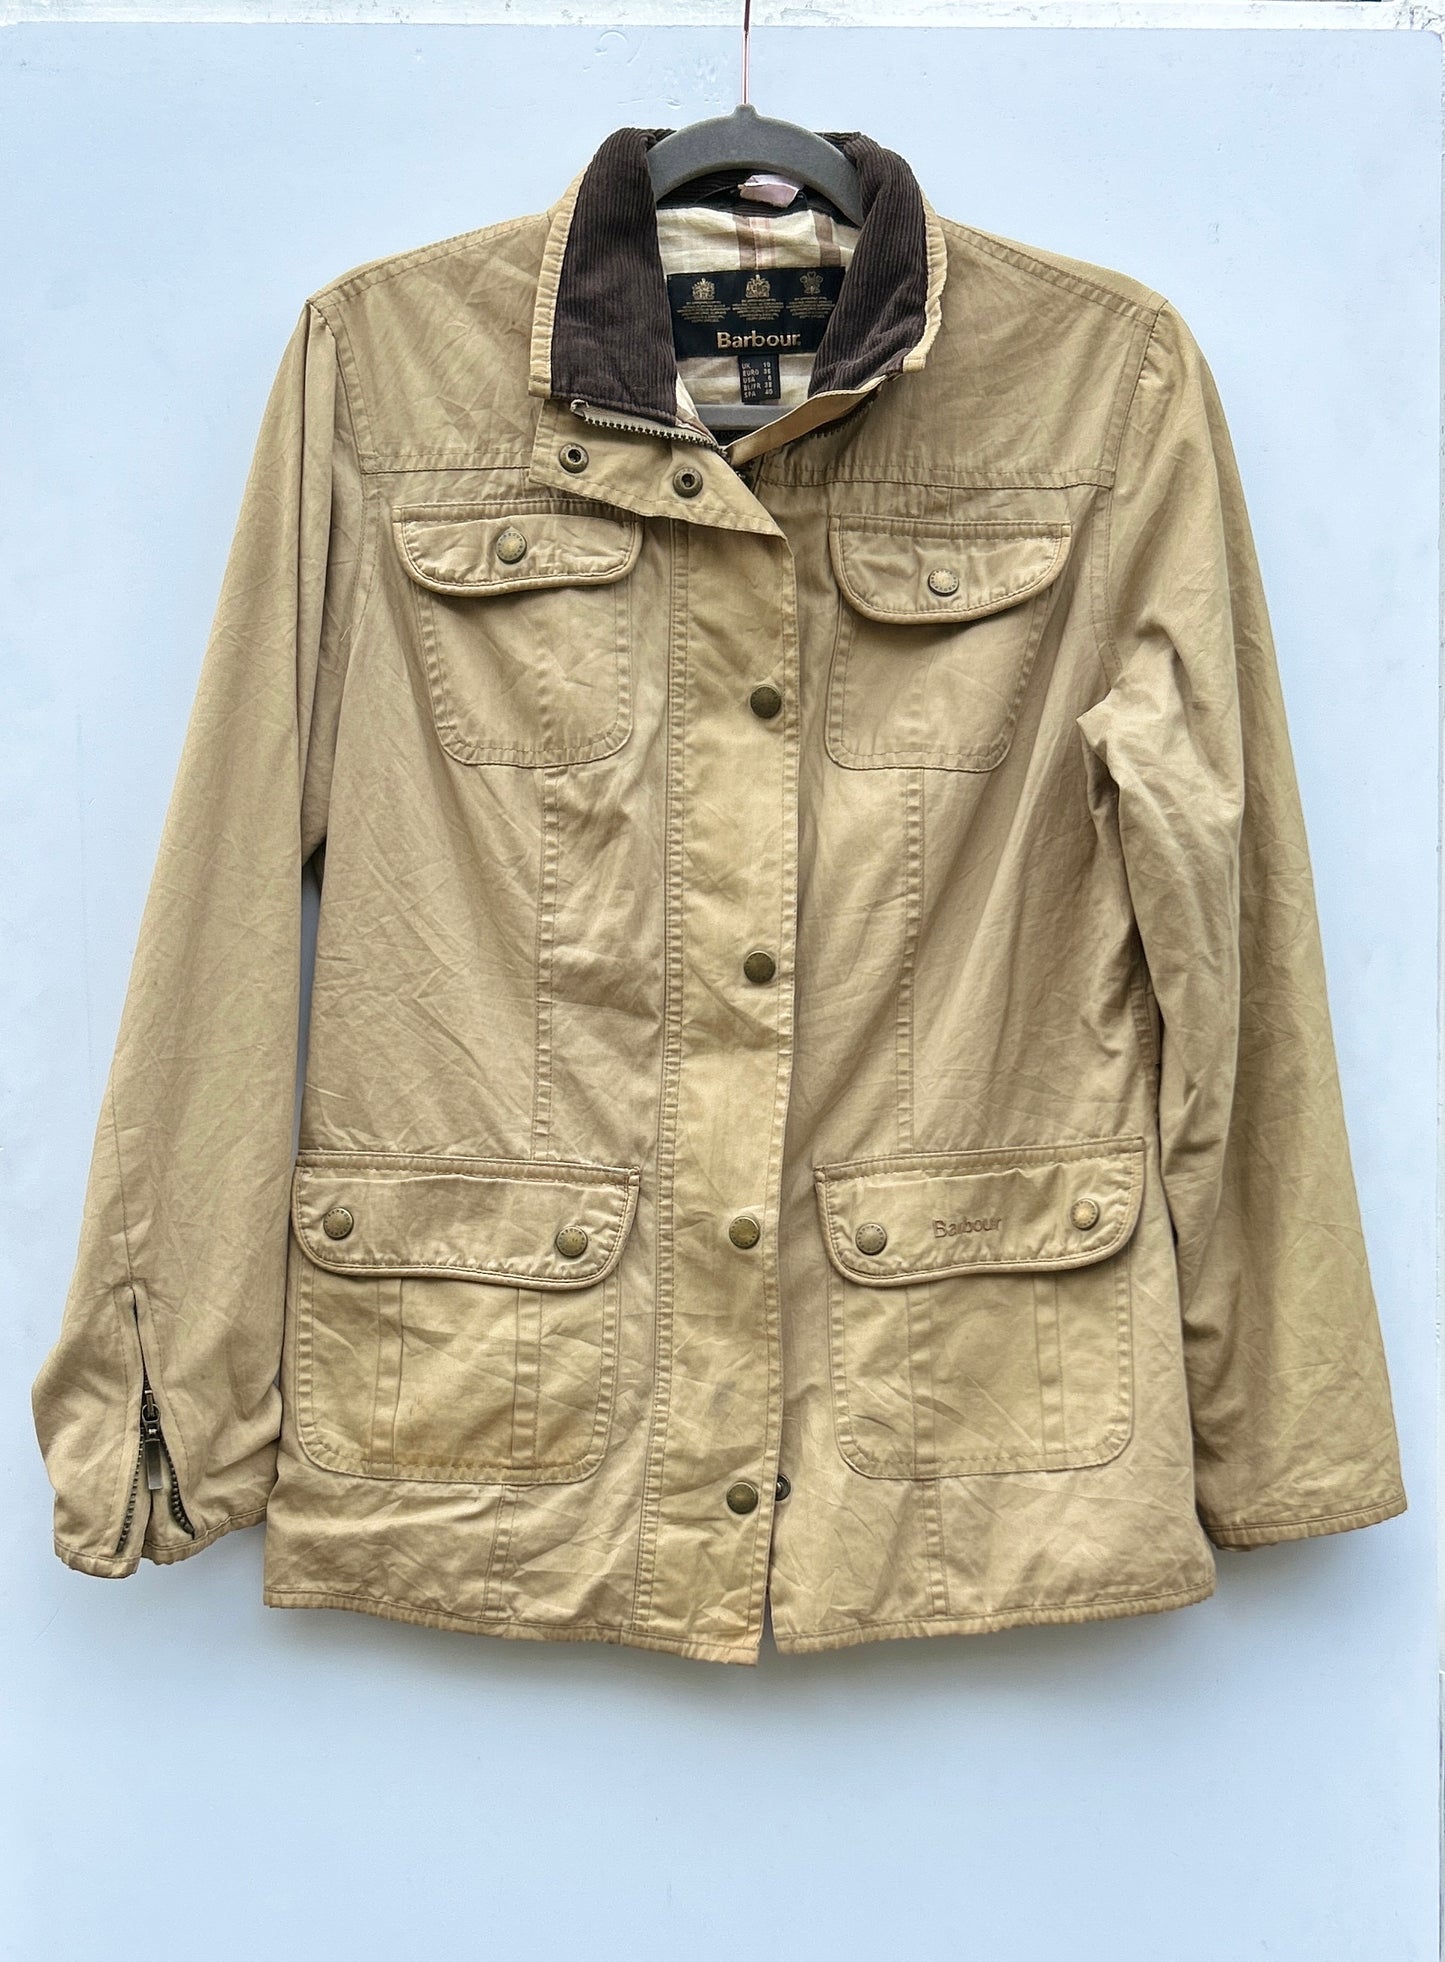 Barbour Giacca Donna Beige Small Tg.40 Lady Utility Jacket UK10